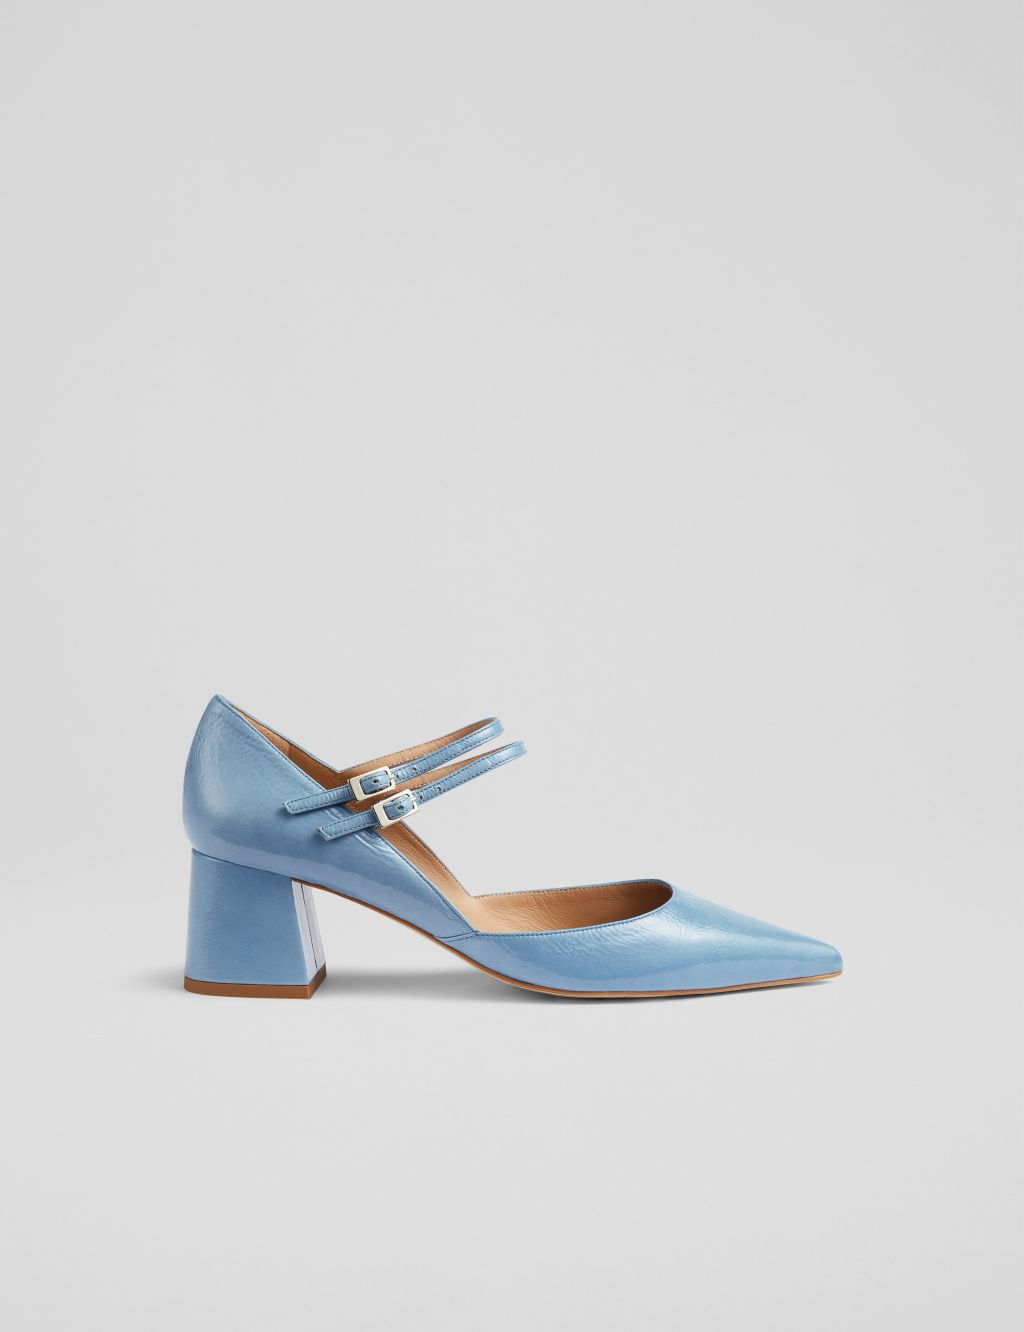 Leather Patent Block Heel Court Shoes